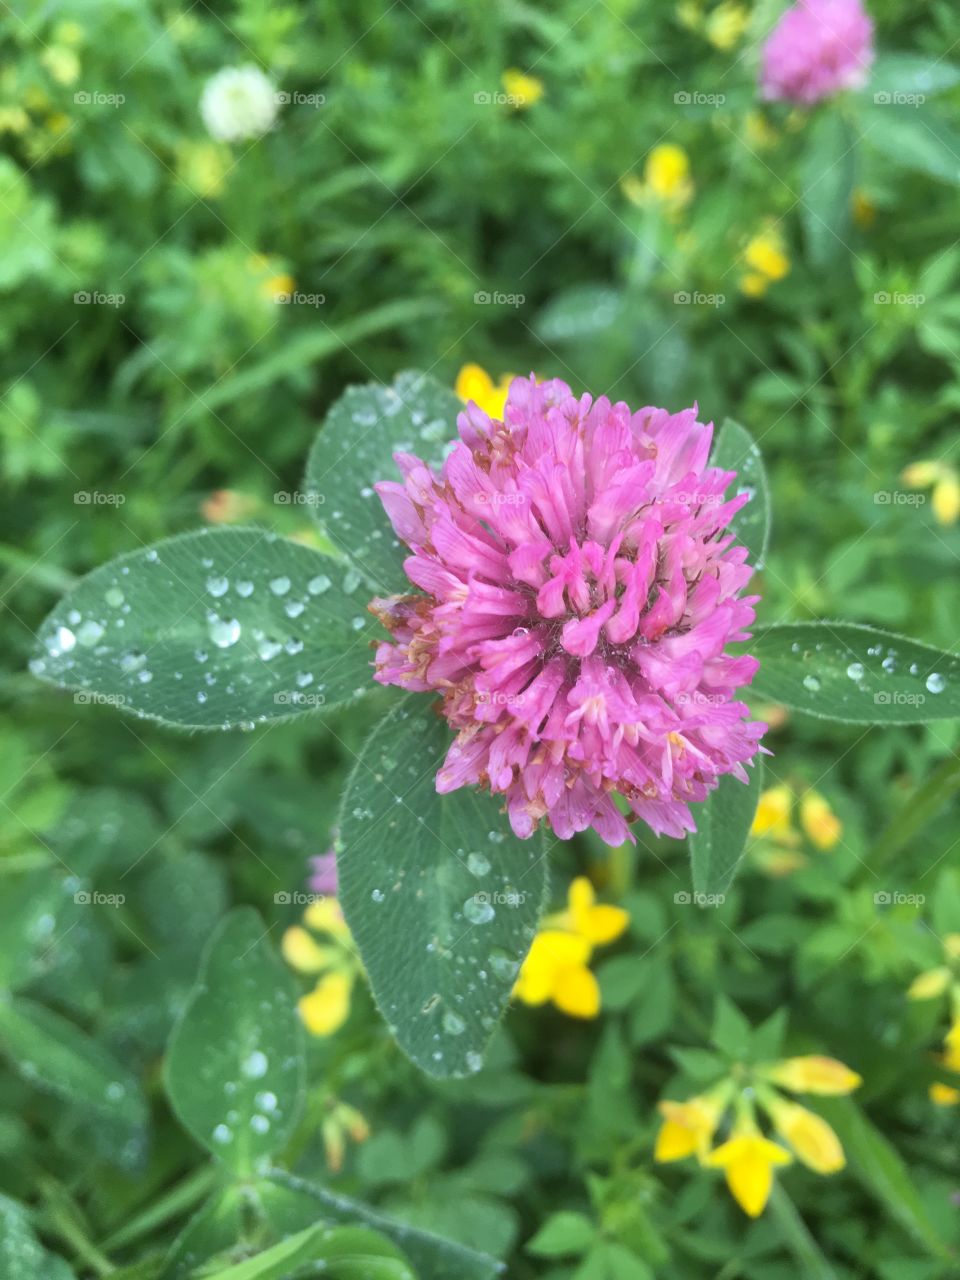 Pretty wild clover, backed by small yellow flowers. Leaves have raindrops on them